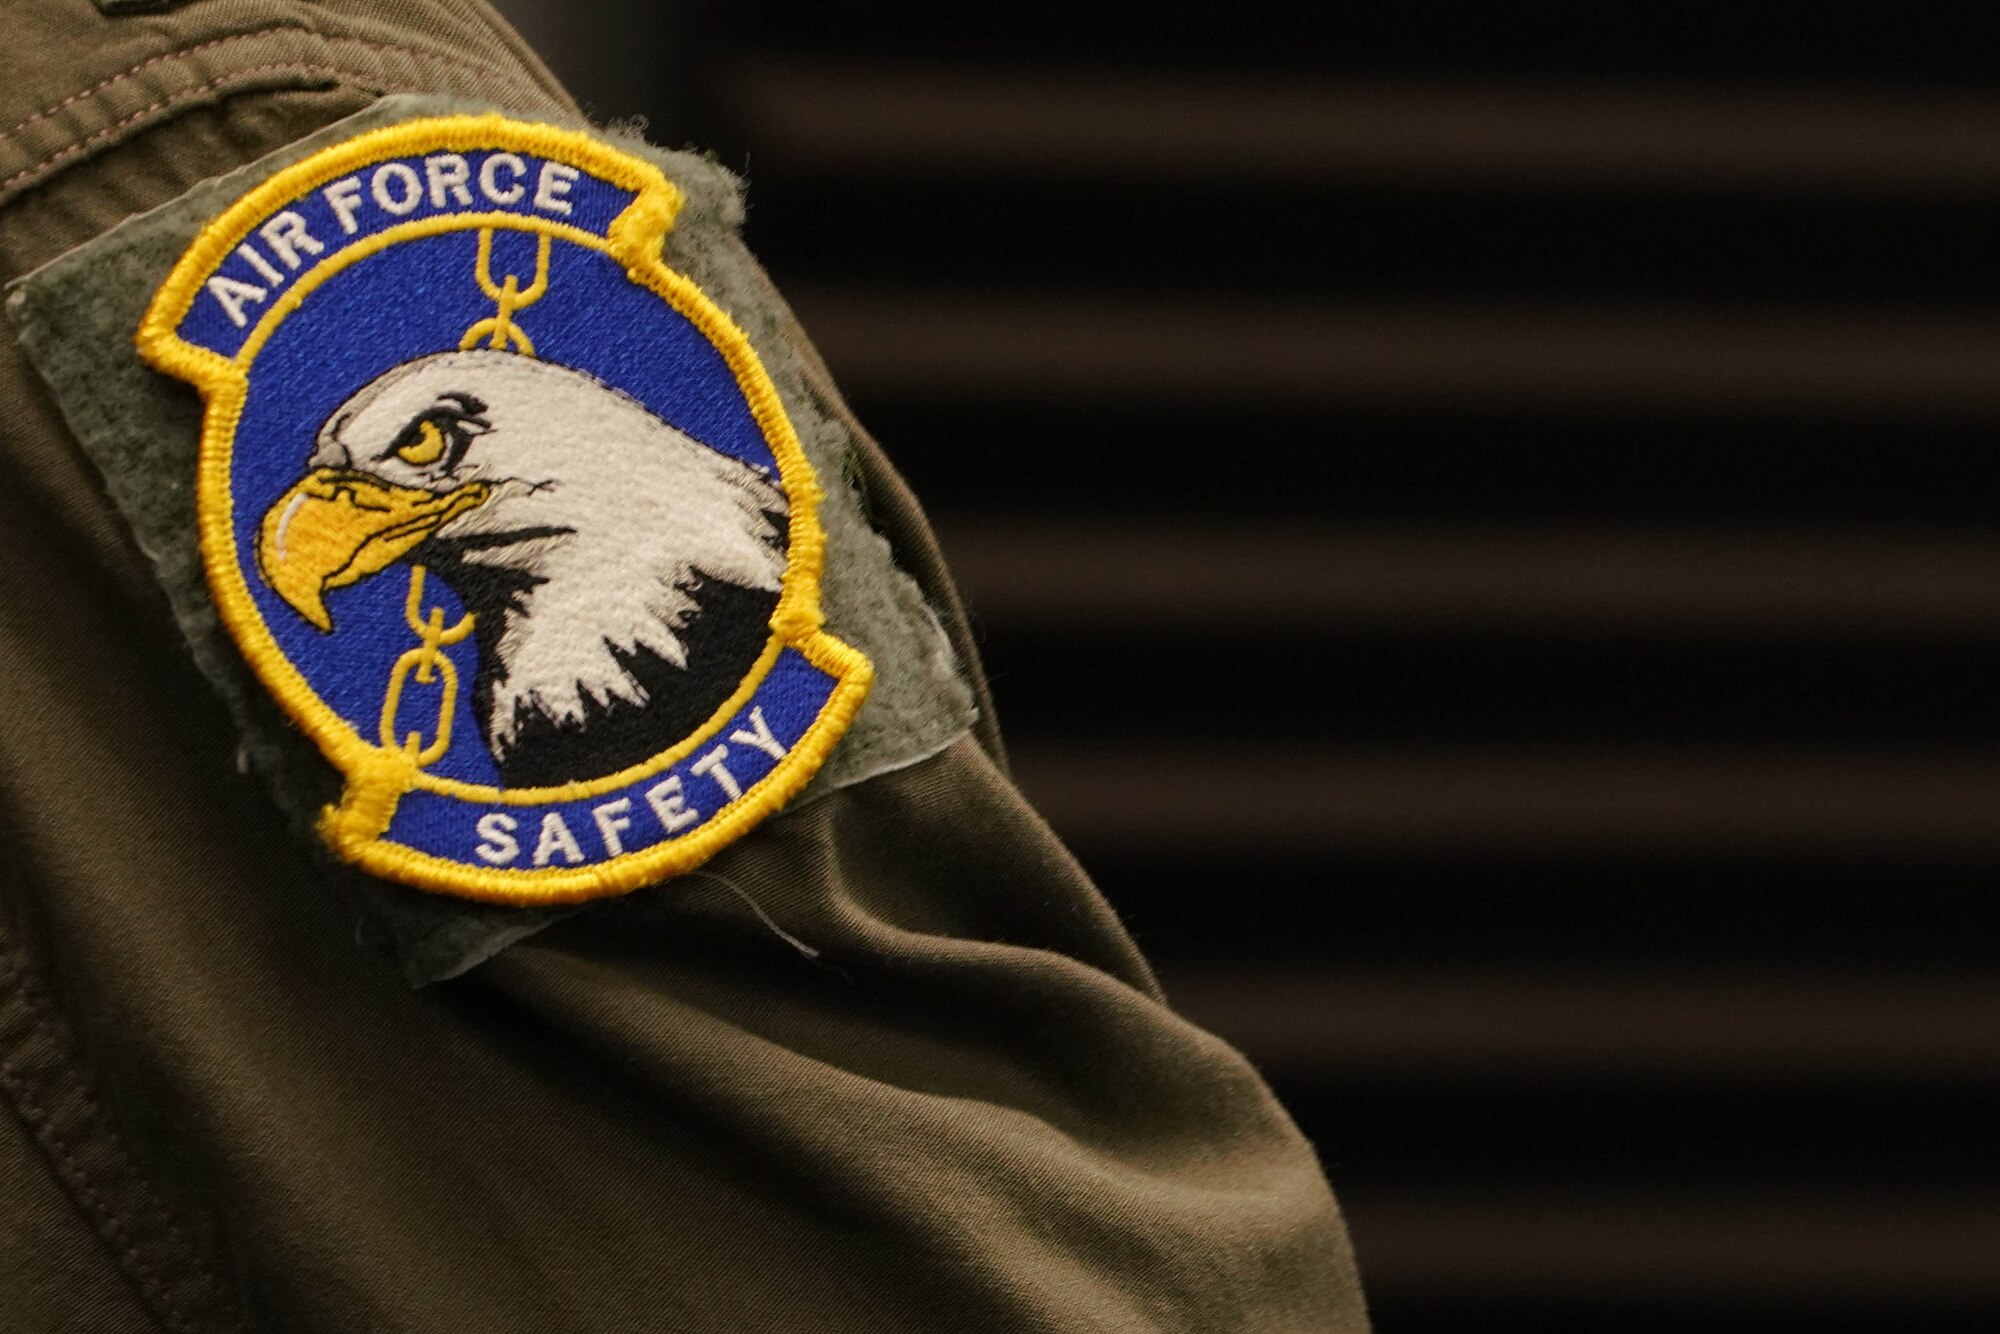 A round patch displaying an eagle, a chain link and the text "air Force Safety" attached to a flight suit sleeve.